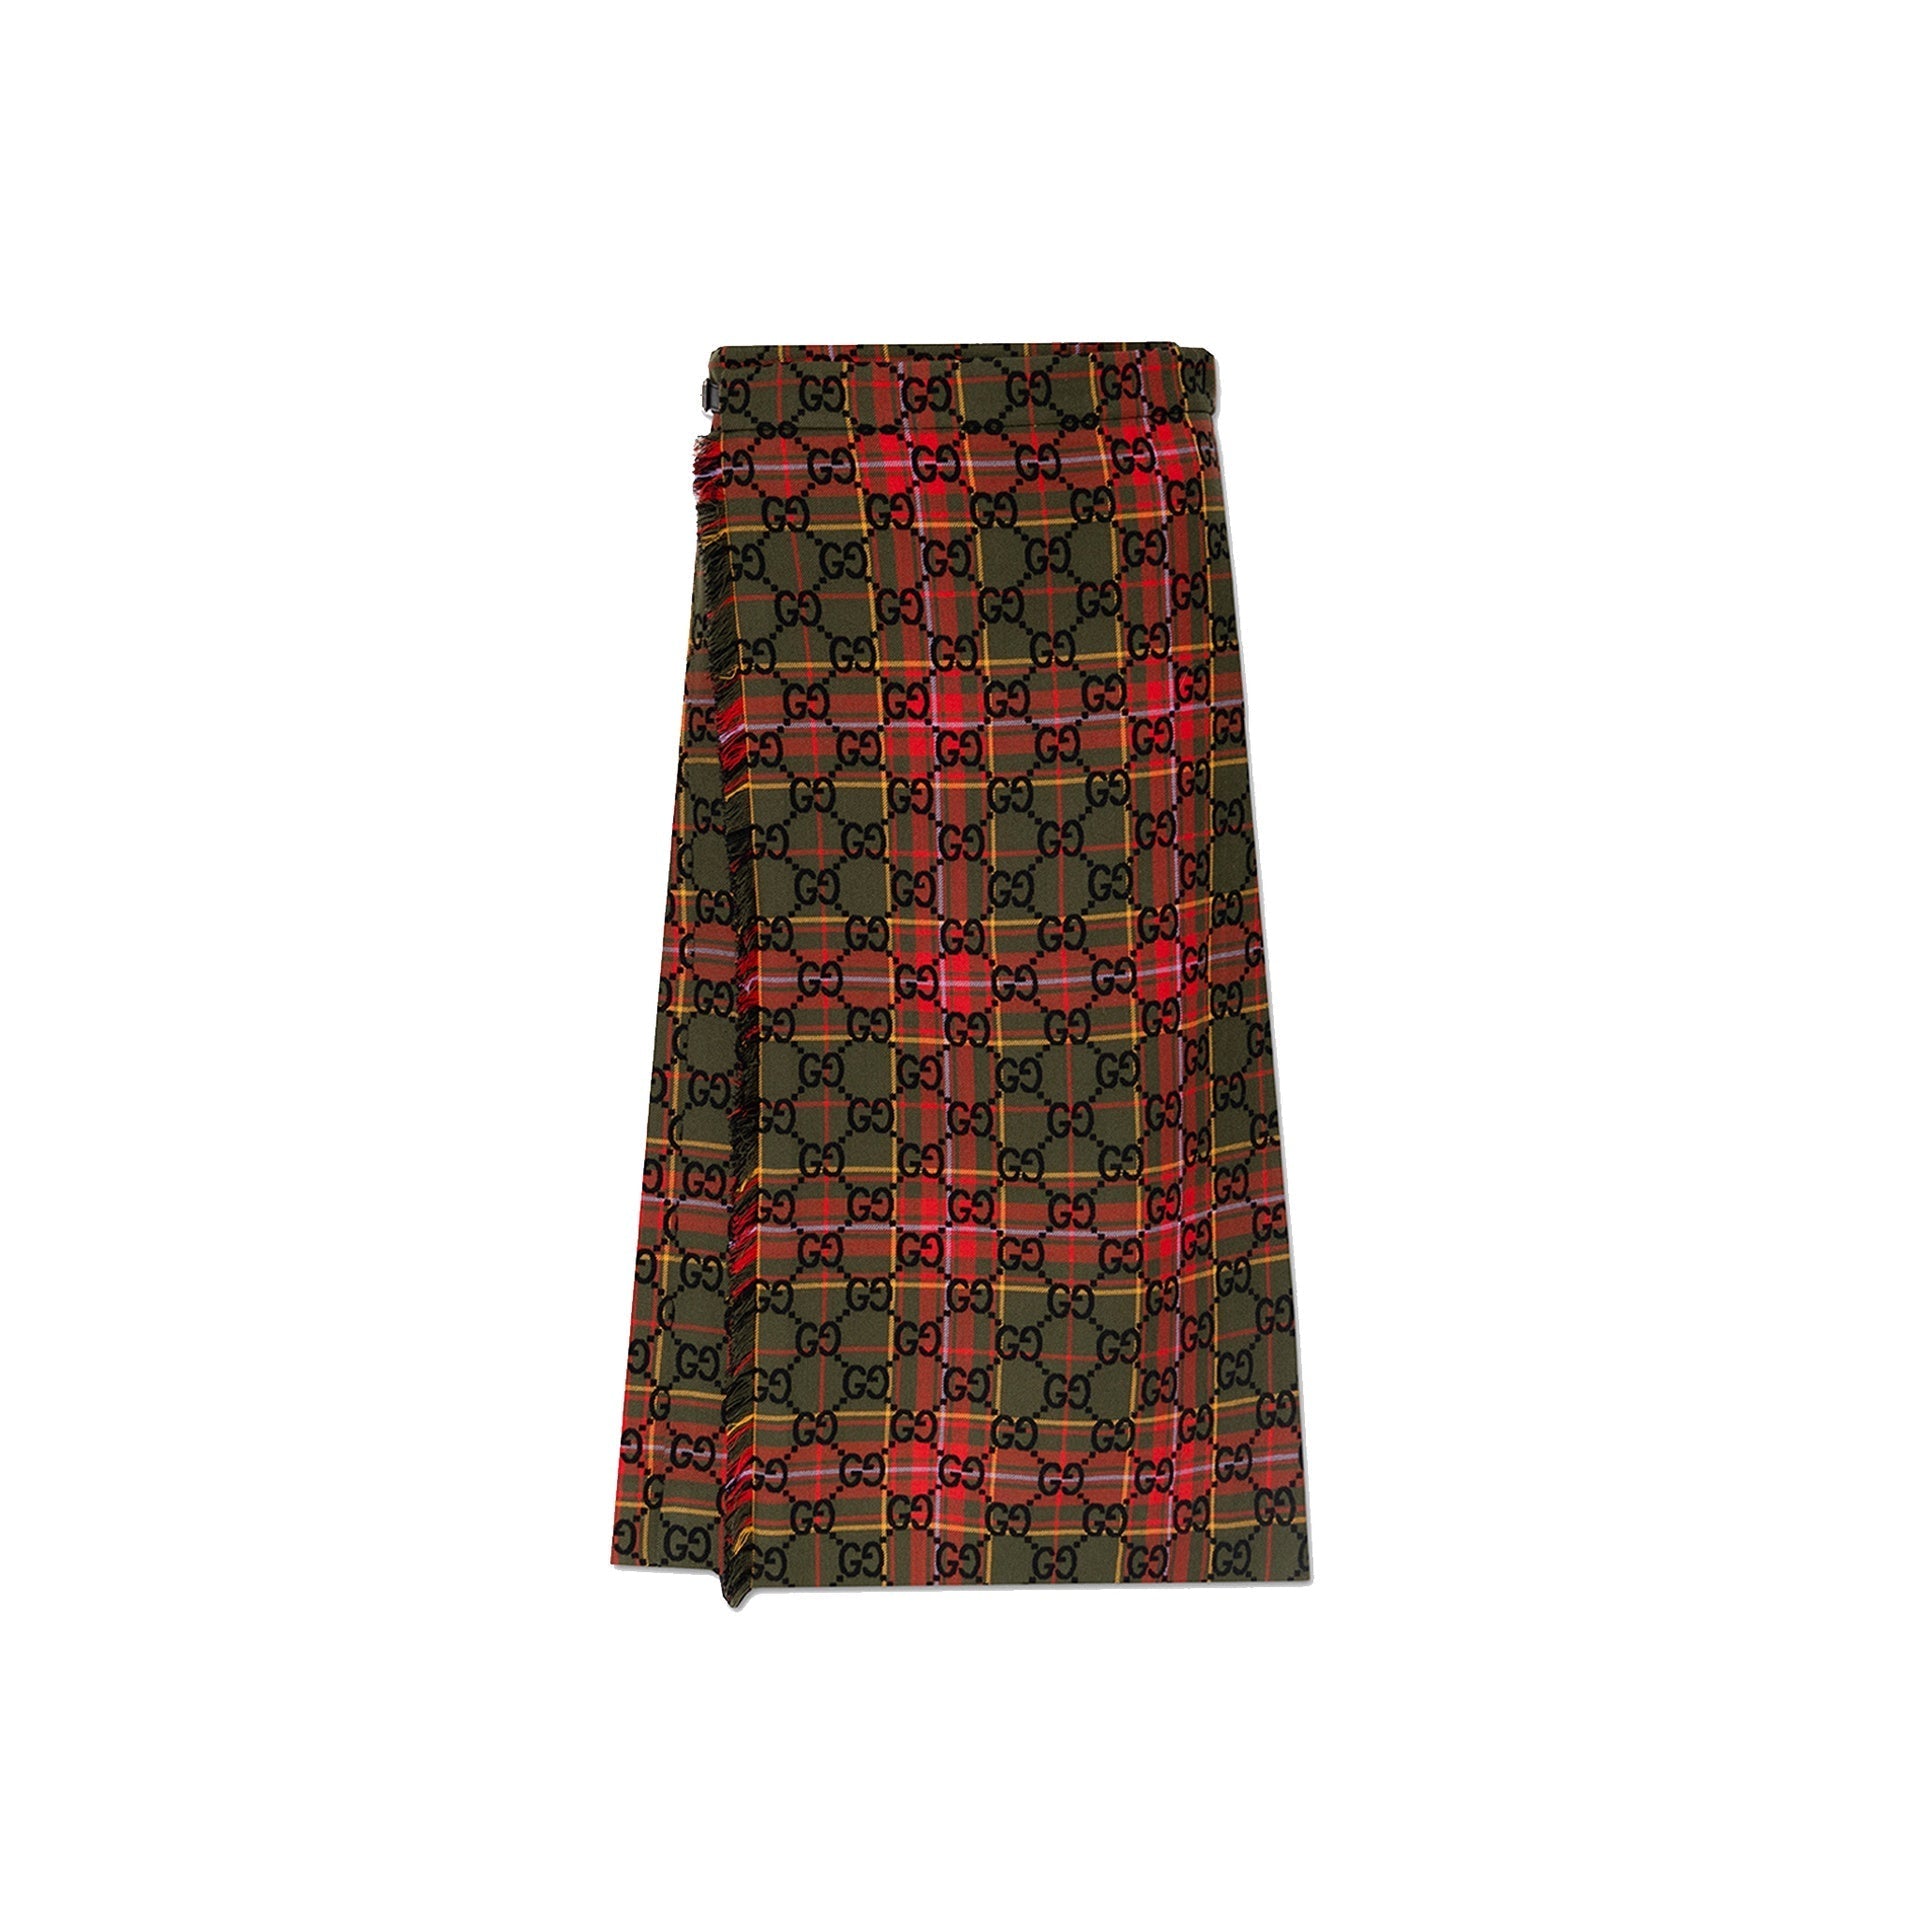 GUCCI-OUTLET-SALE-Gucci-GG-Wool-Skirt-WOMEN-CLOTHING-MULTICOLOR-42-ARCHIVE-COLLECTION.jpg